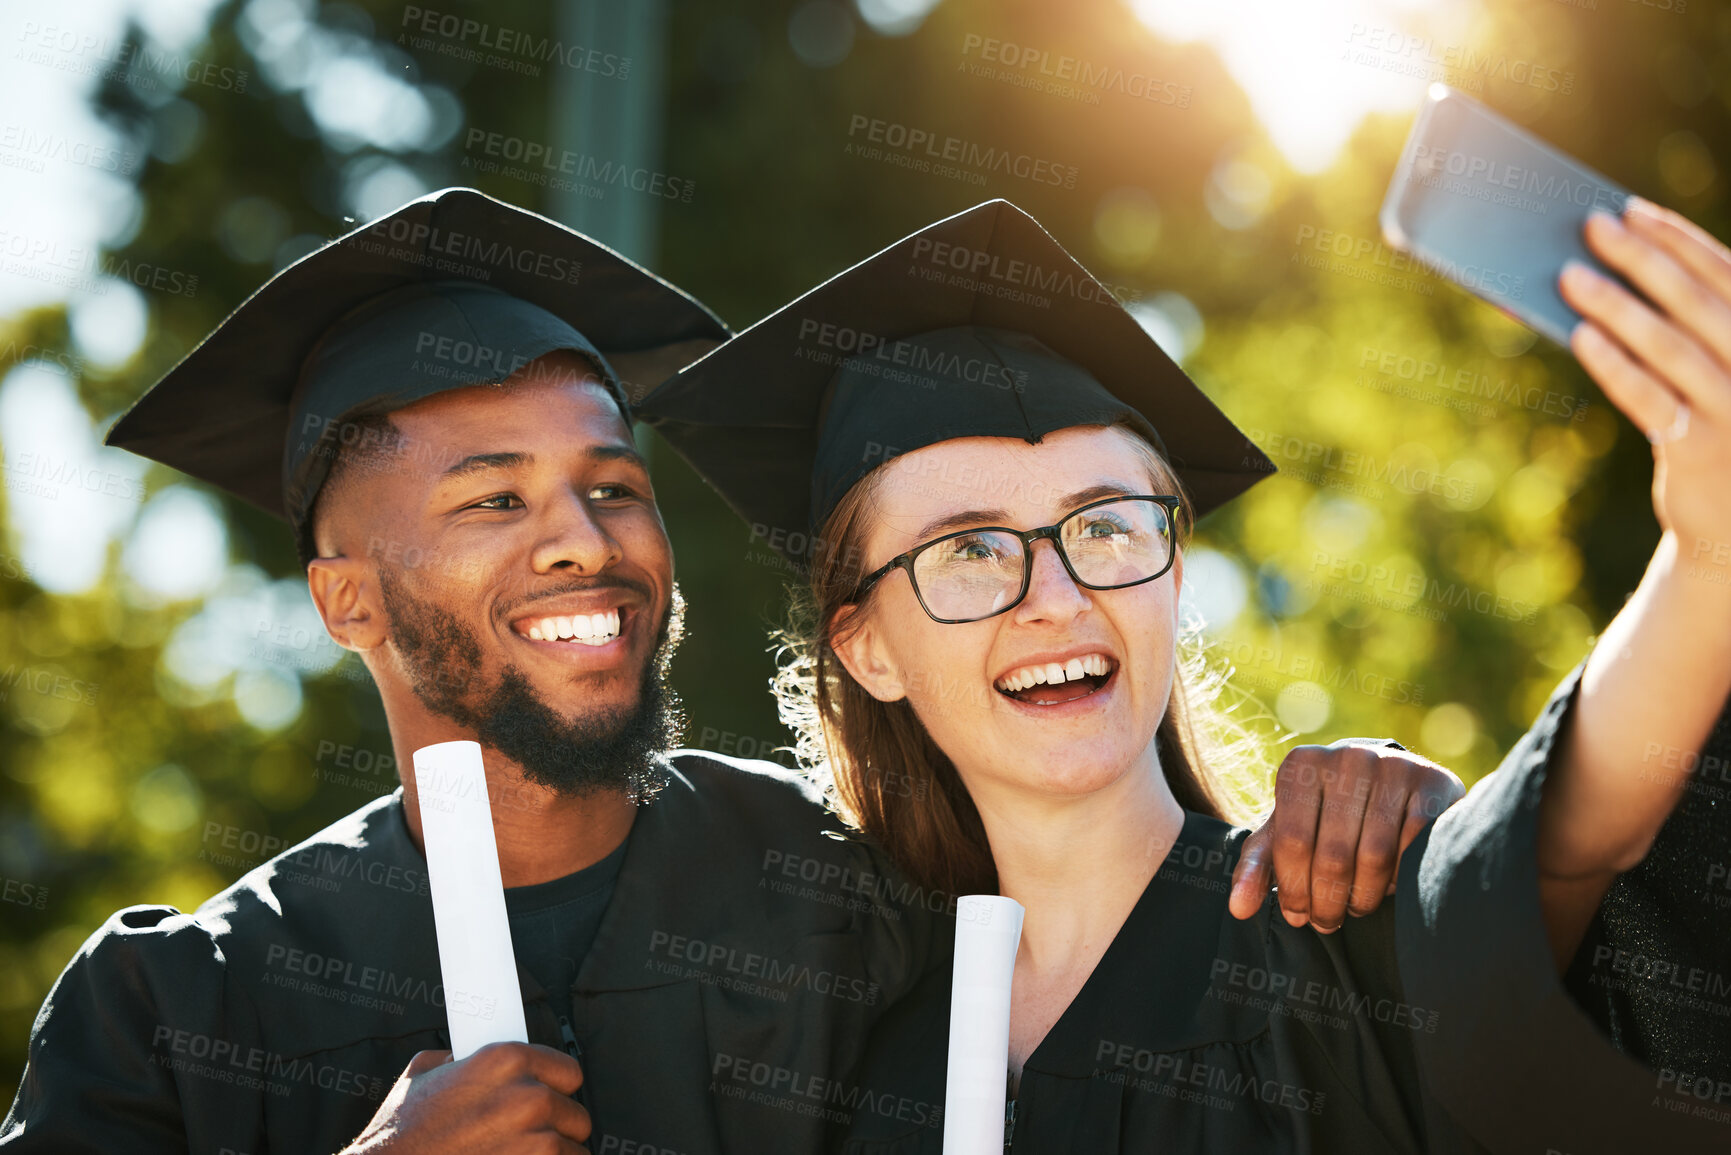 Buy stock photo Selfie, college graduation and students in university celebrate academic success with a happy smile, black gown and graduation cap. Education, graduate certificate and friends with diploma in hands